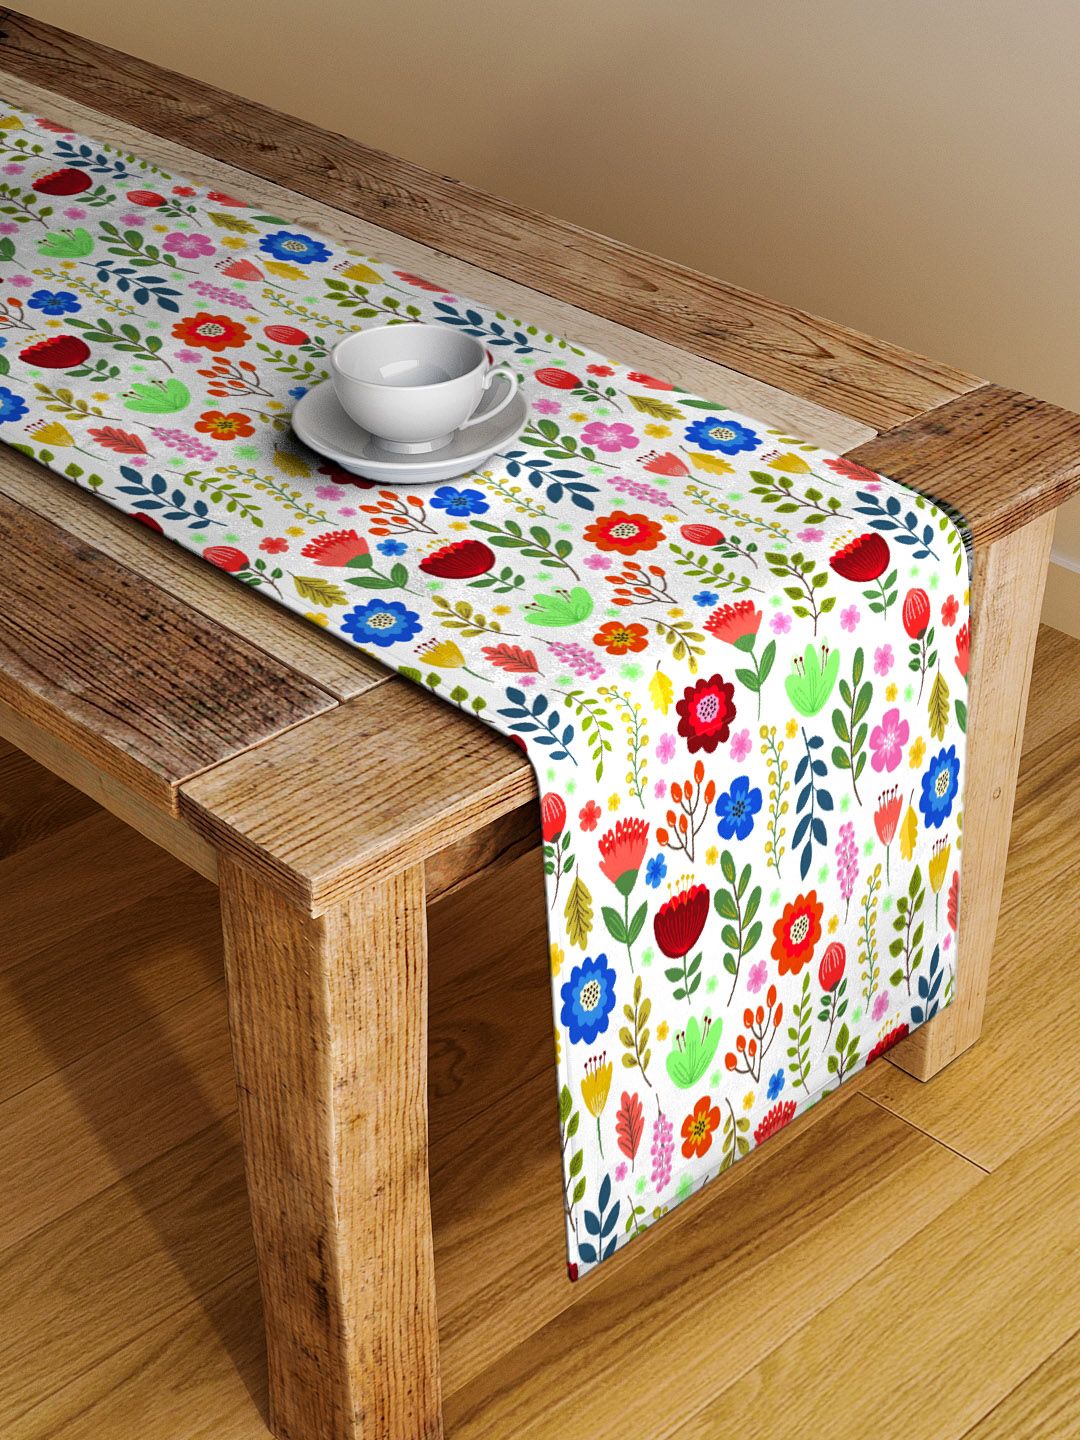 Alina decor Off-White Floral Table Runner Price in India